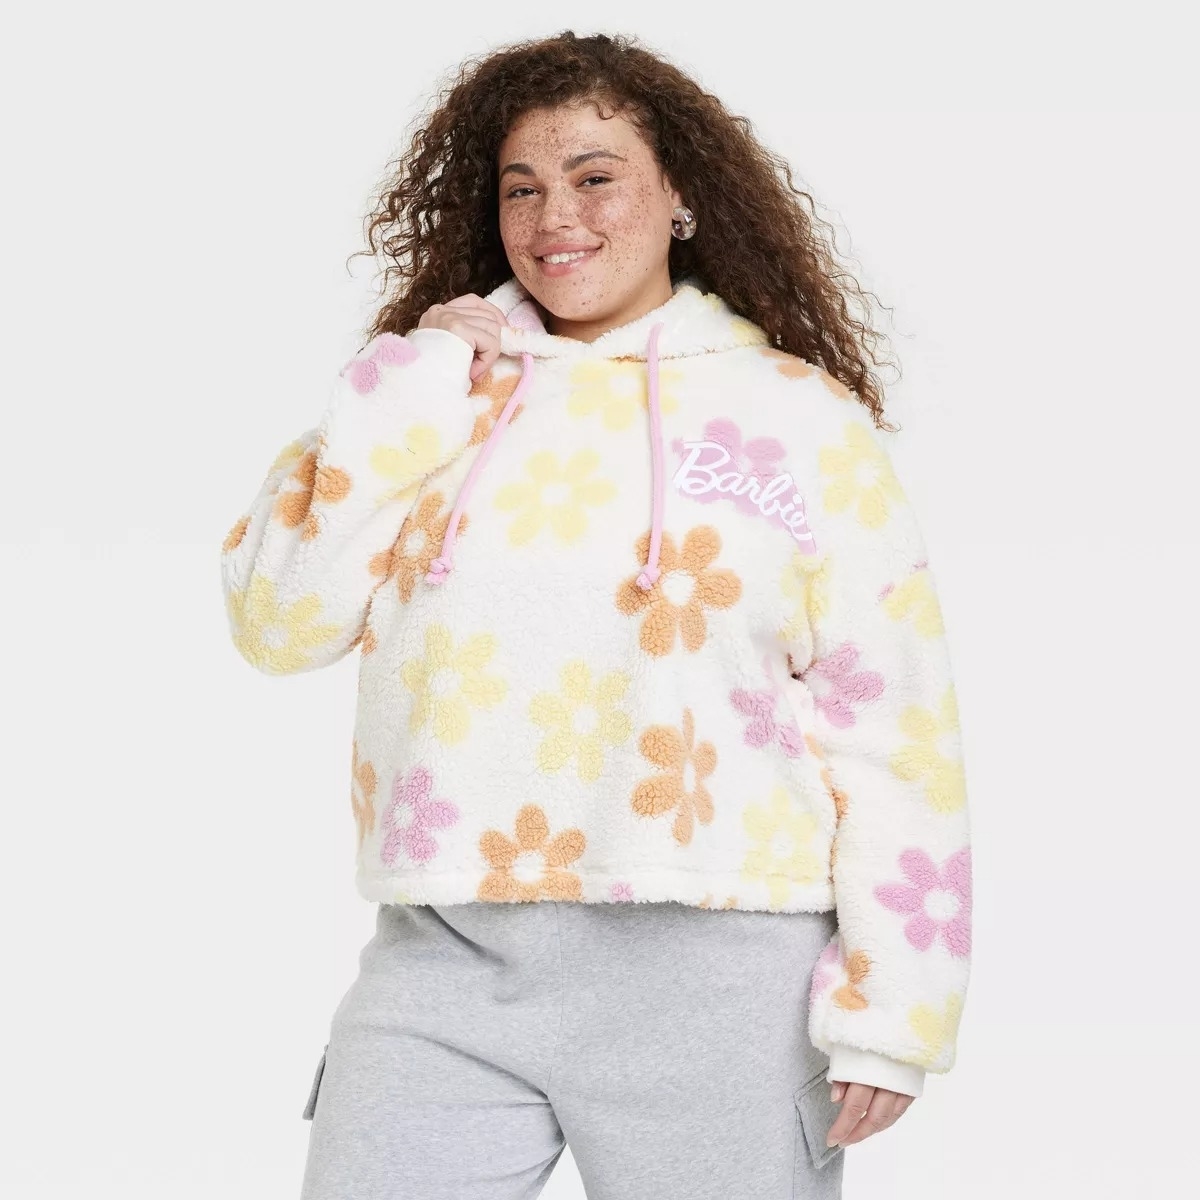 A model in a Barbie floral hoodie with yellow, orange and pink flowers